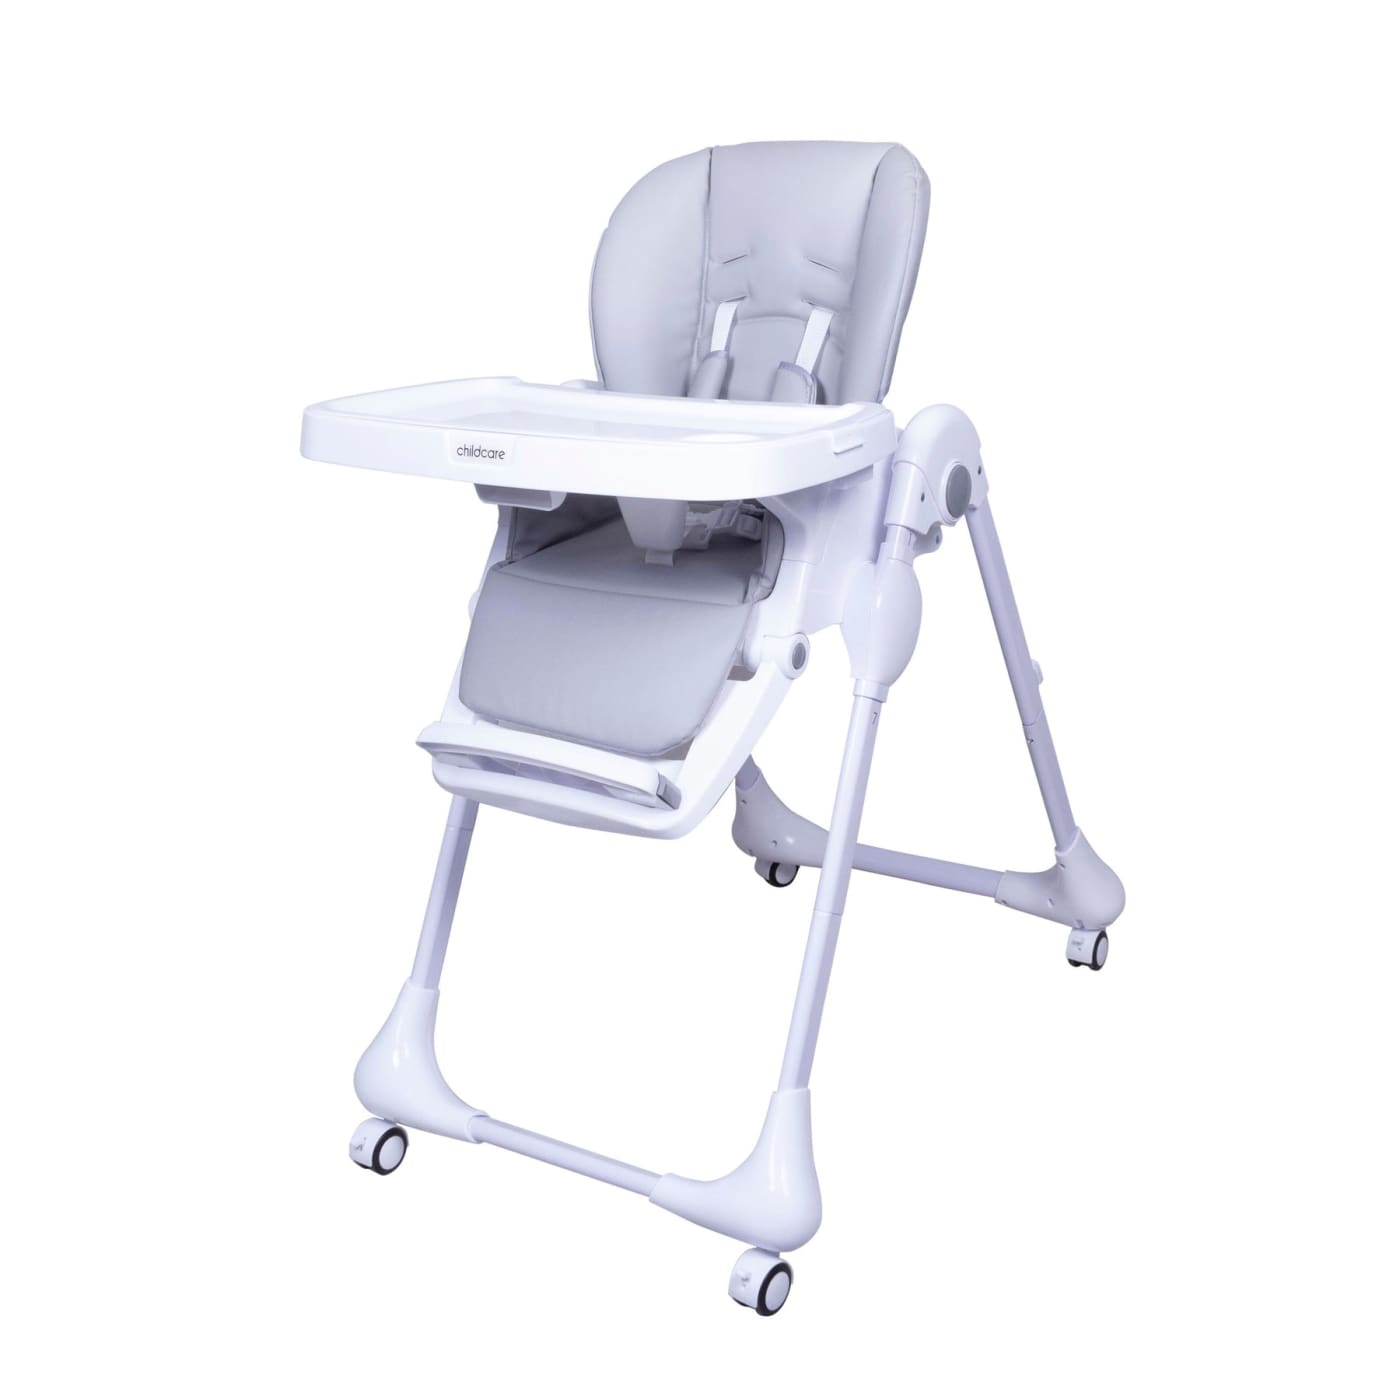 Childcare Pip Highchair - Cool Grey - Cool Grey - NURSING & FEEDING - HIGH CHAIRS/BOOSTER SEATS